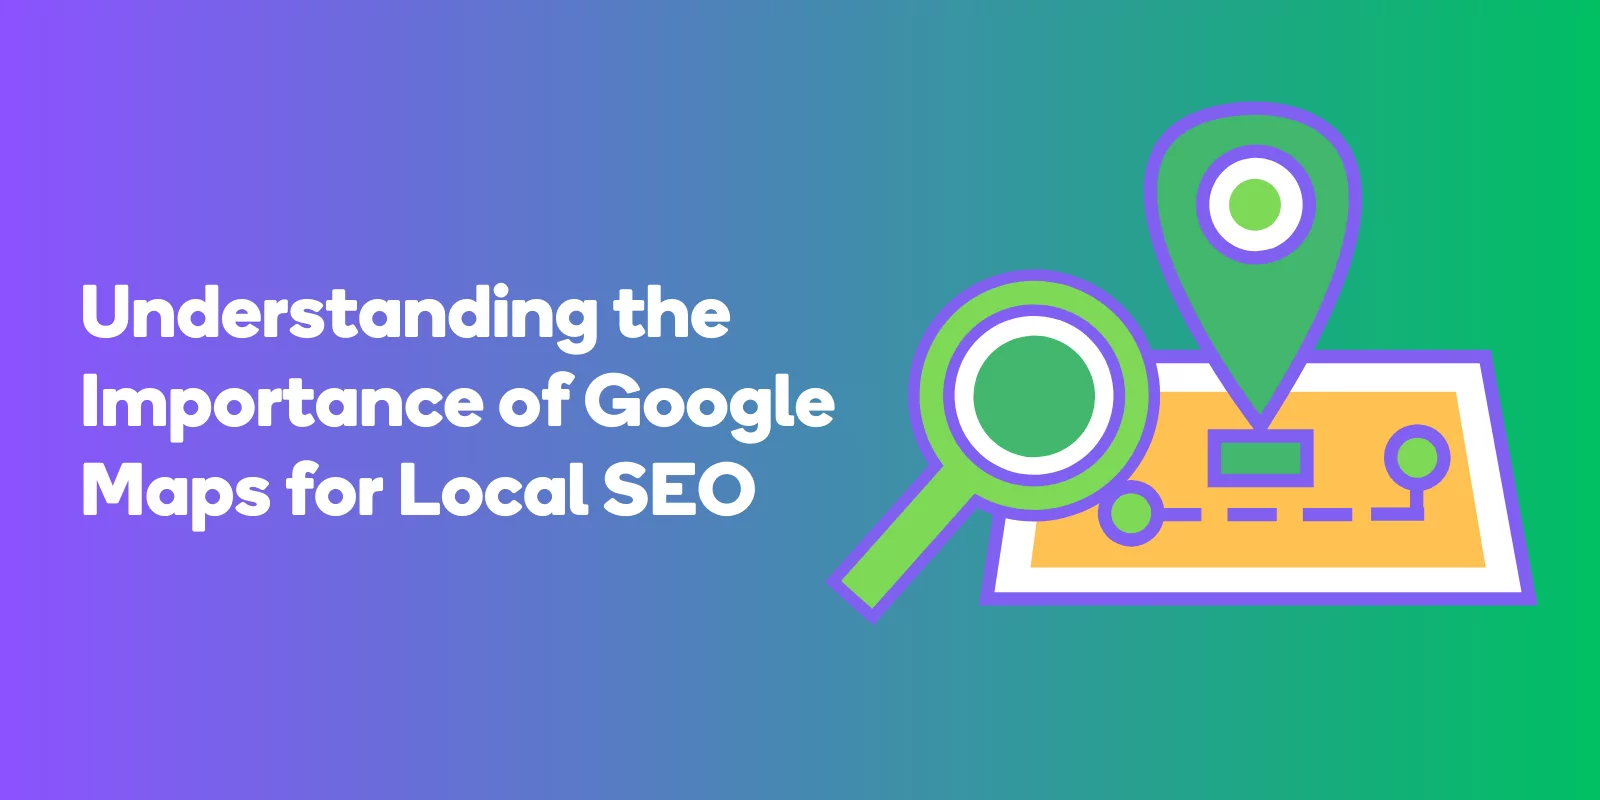 Understanding the Importance of Google Maps for Local SEO